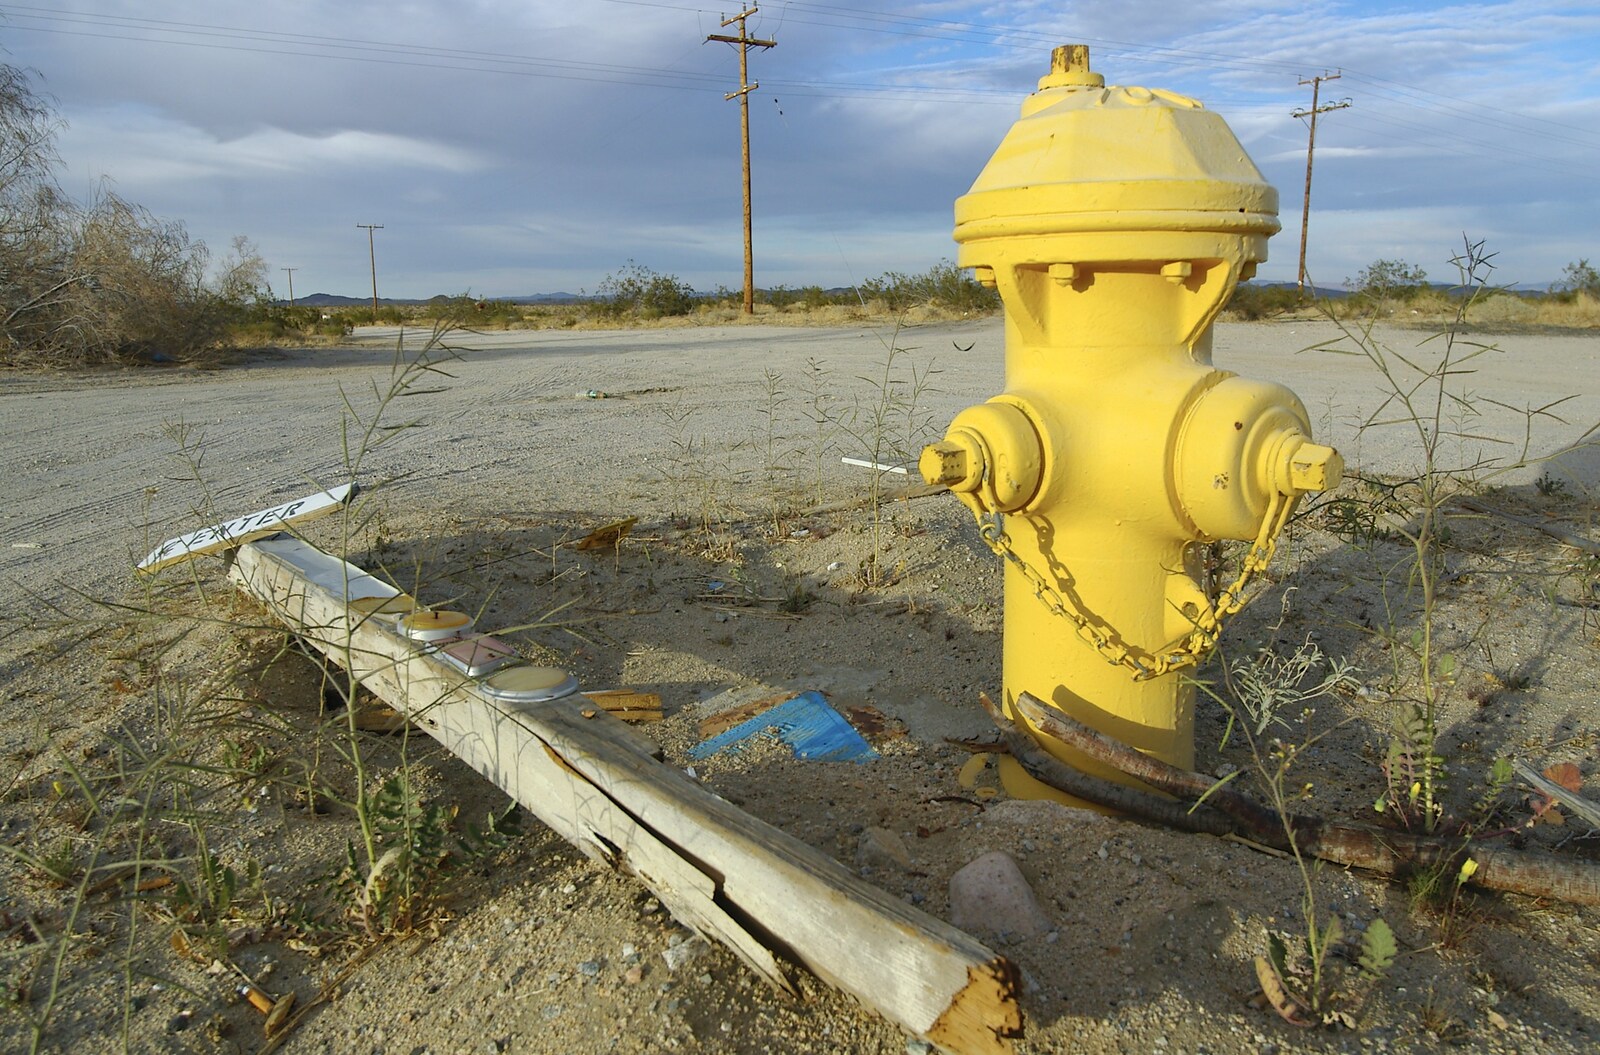 A yellow fire hydrant from Mojave Desert: San Diego to Joshua Tree and Twentynine Palms, California, US - 5th March 2006